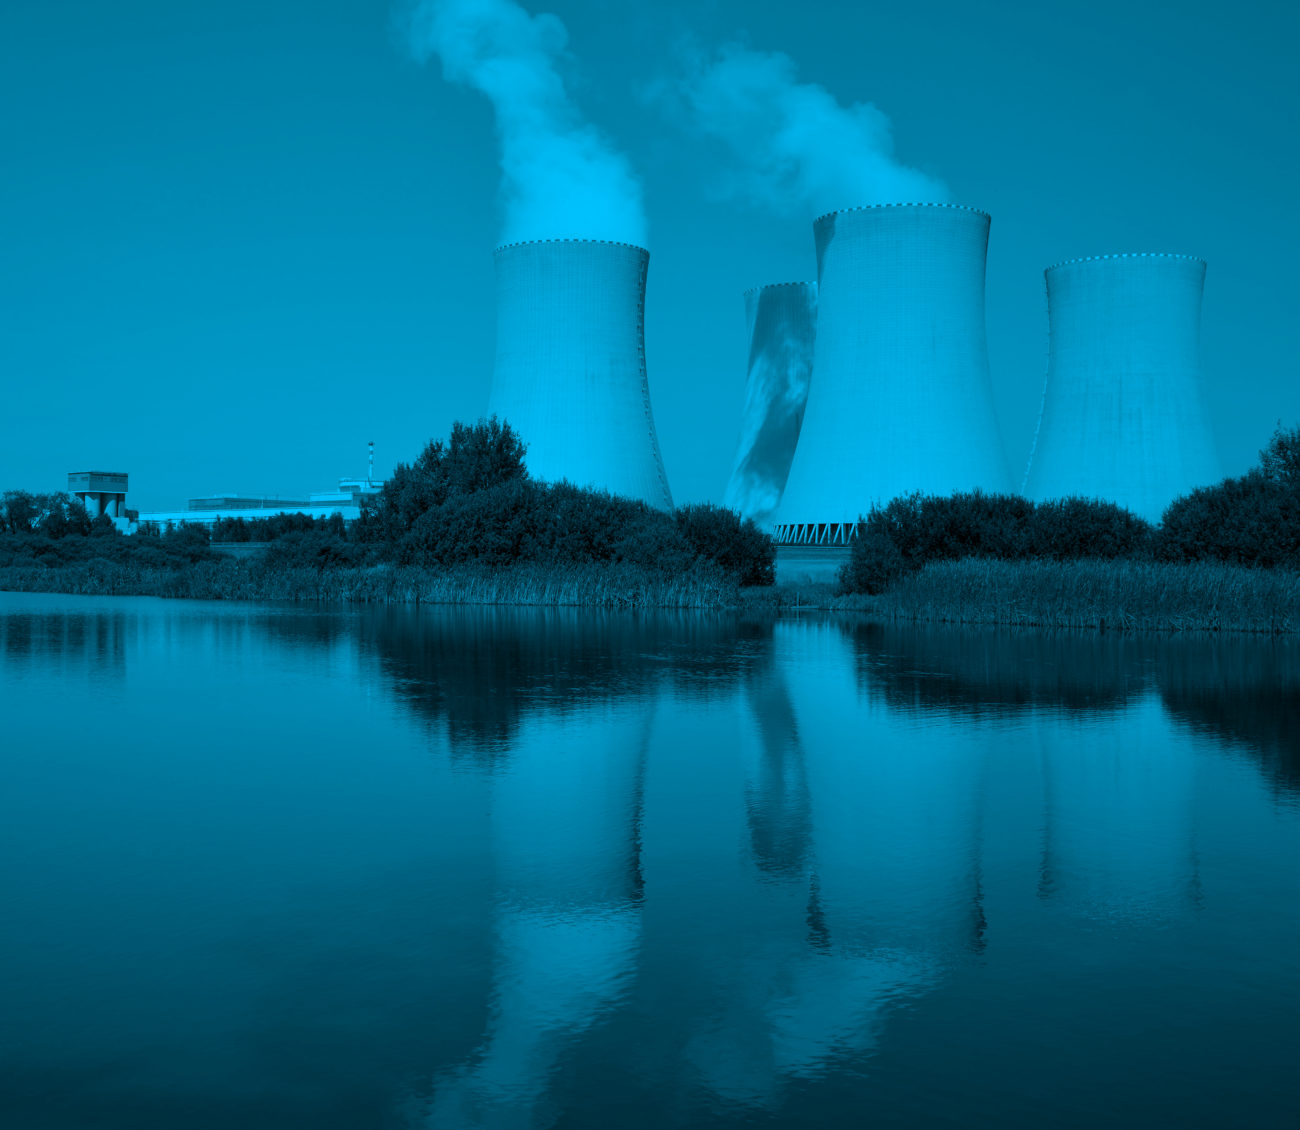 Keeping Nuclear Power Plants Secure and in Operation during the Pandemic